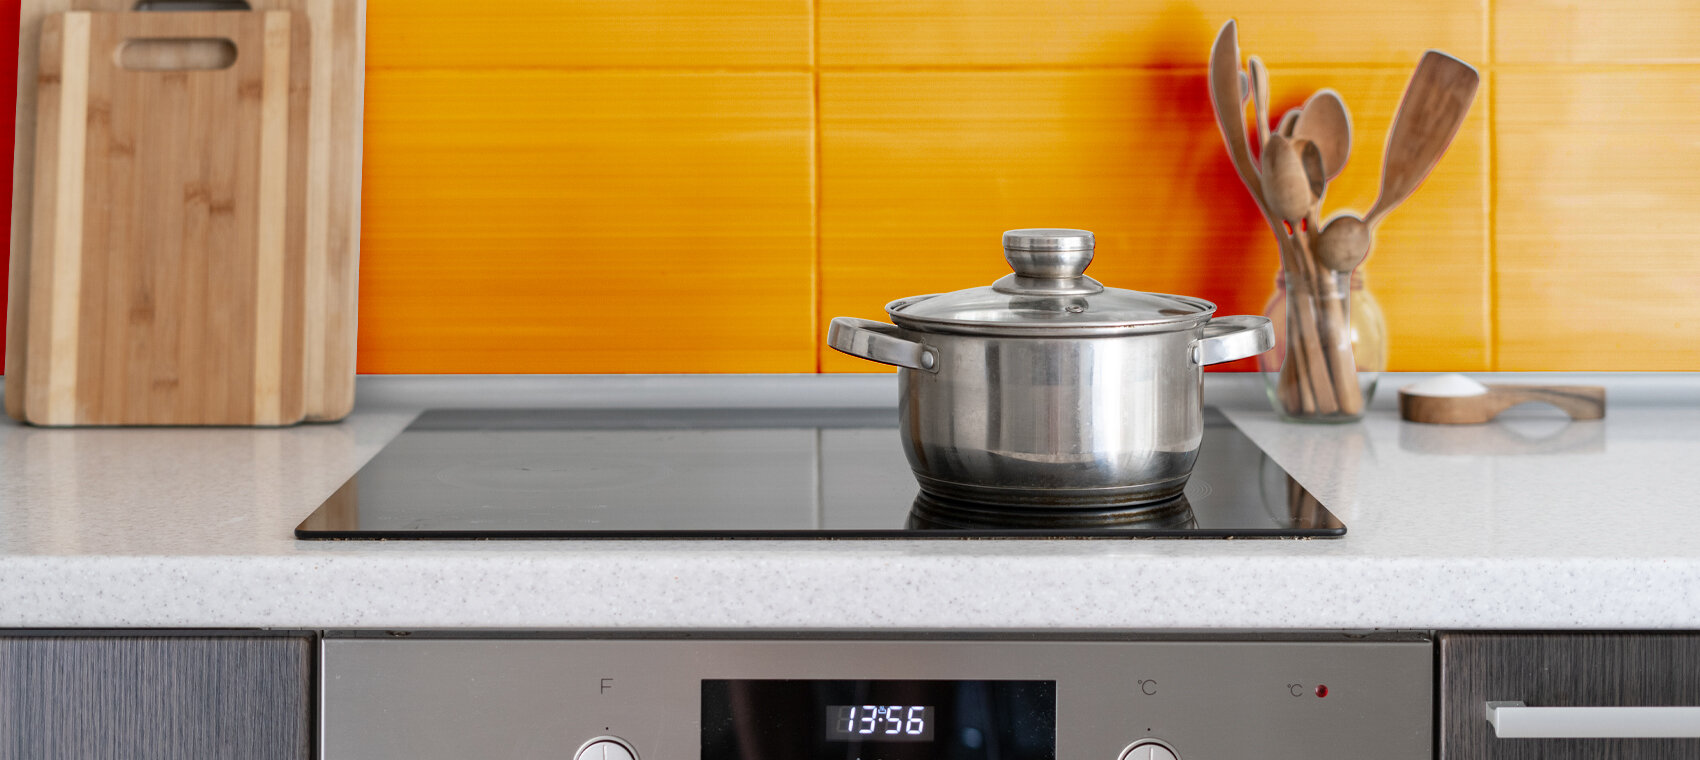 How to Clean Your Oven and Stovetop